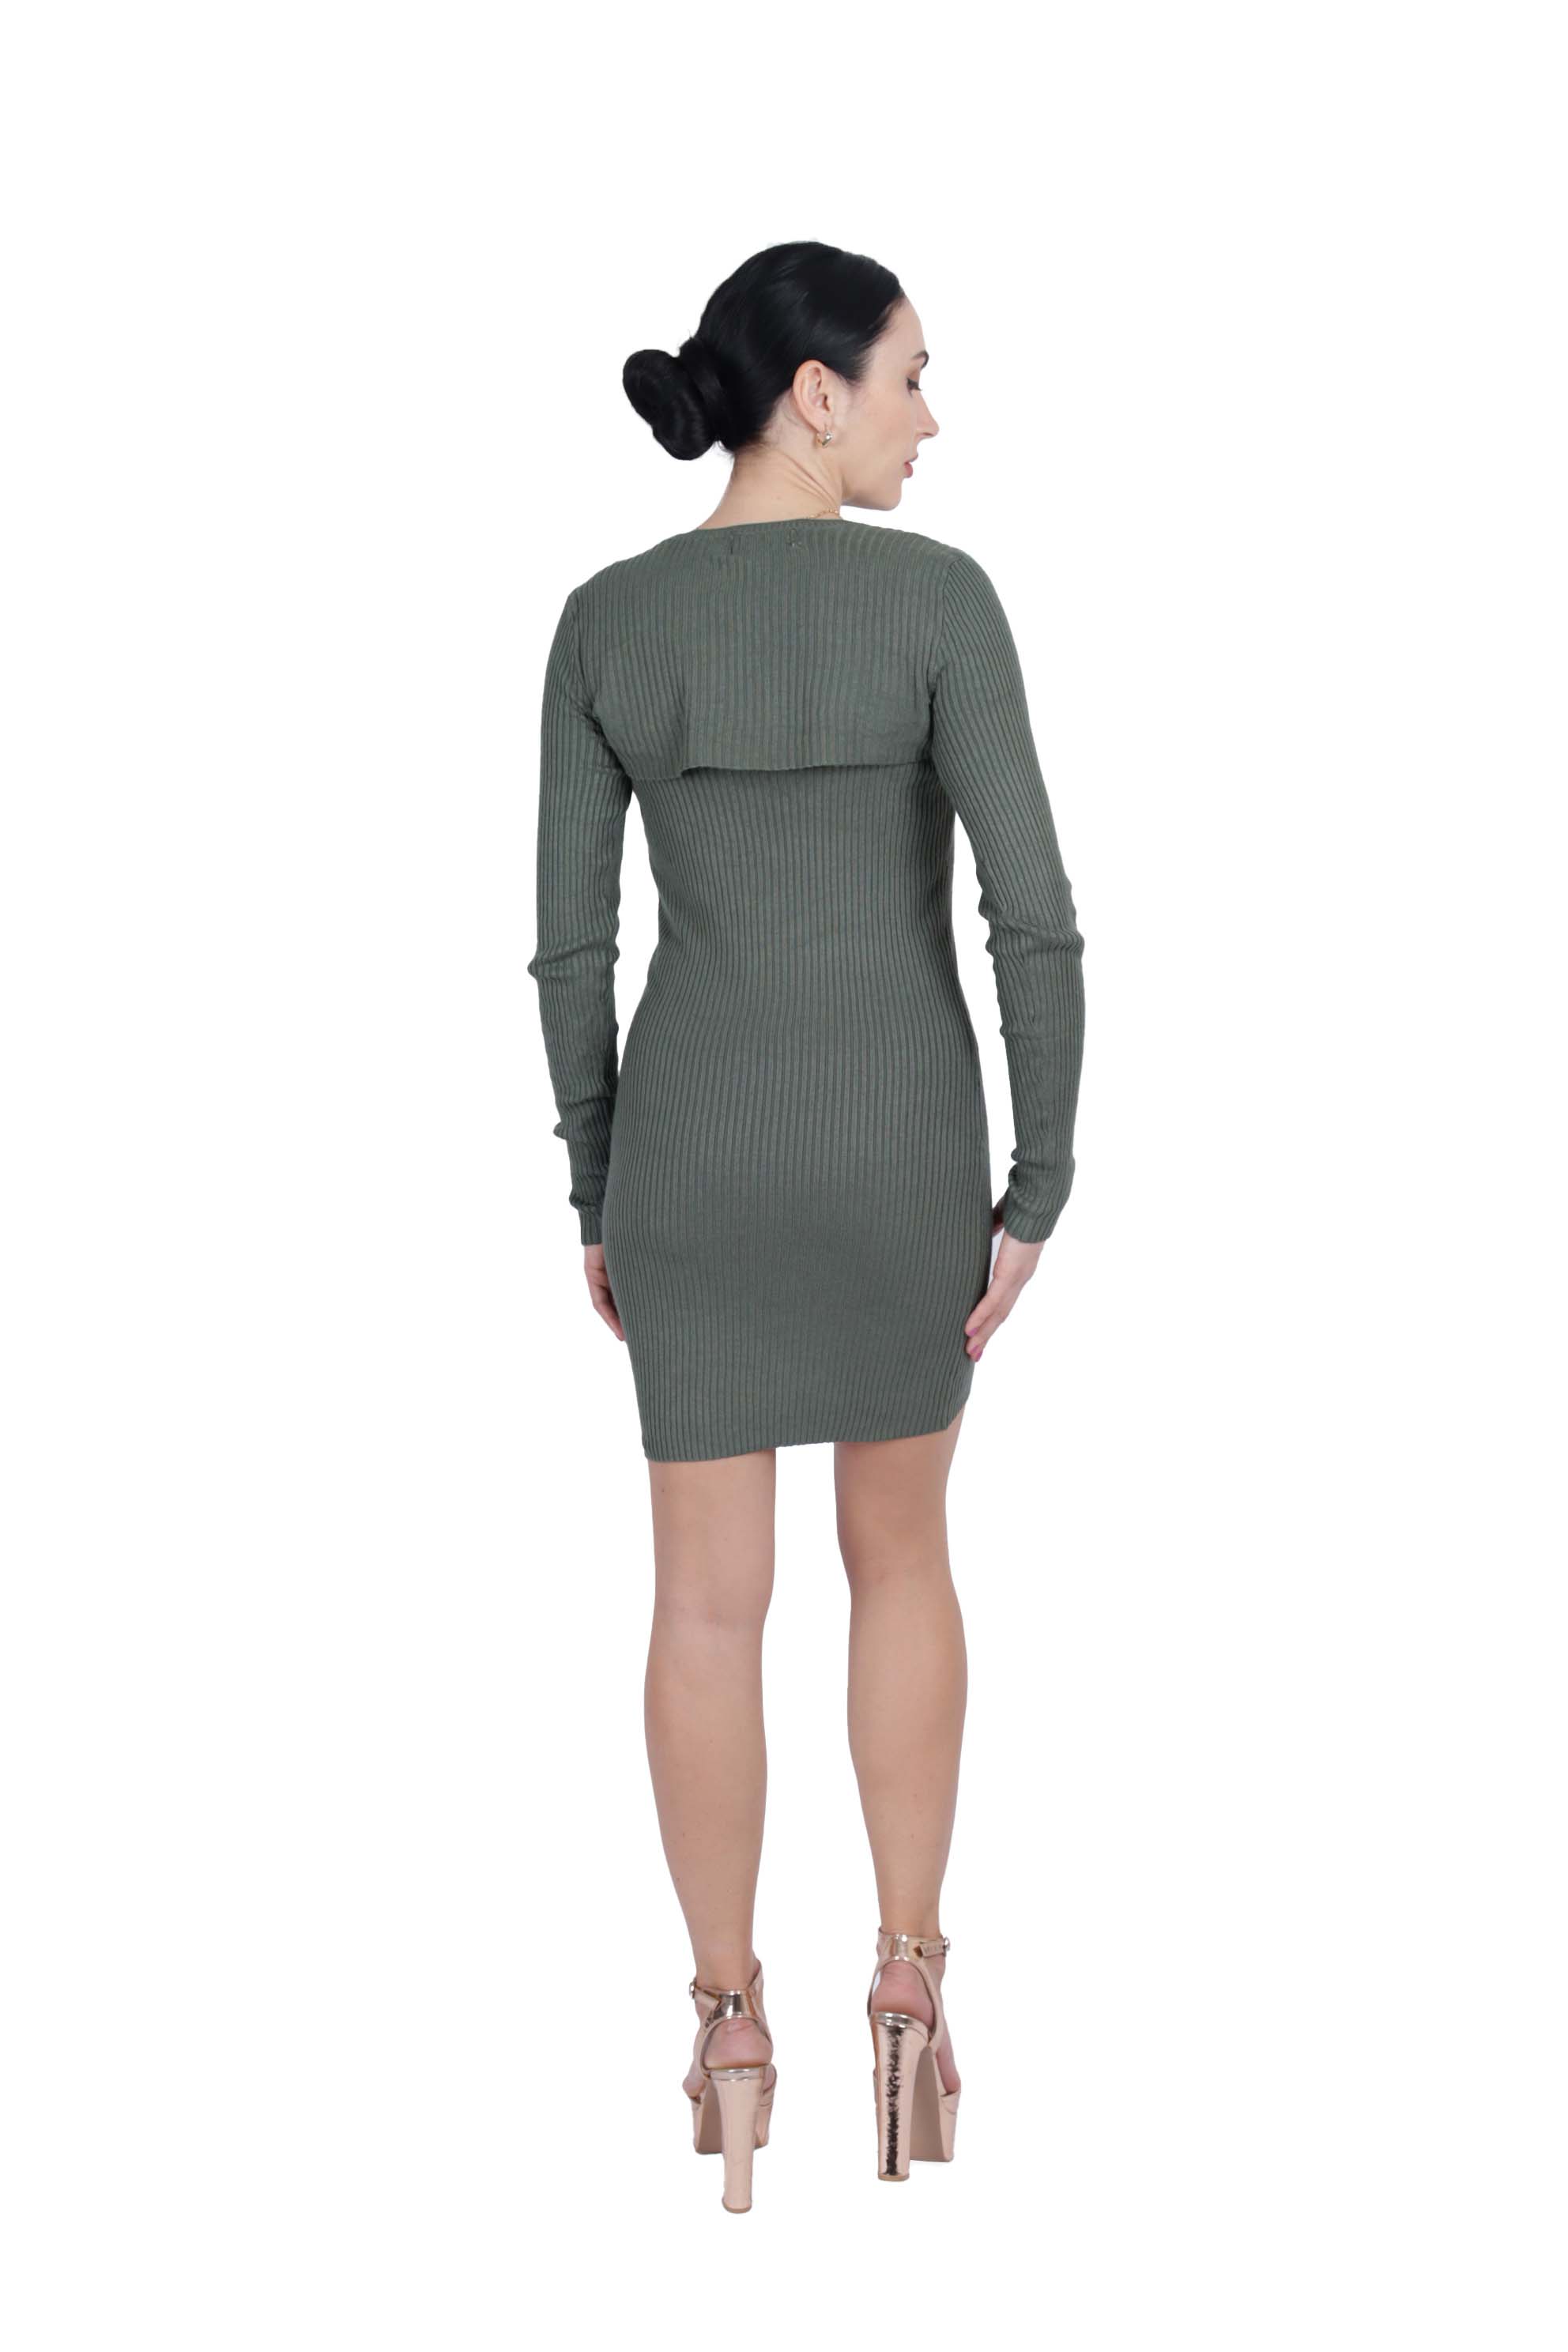 Women's Sexy Bodycon Dress Solid Color Dress